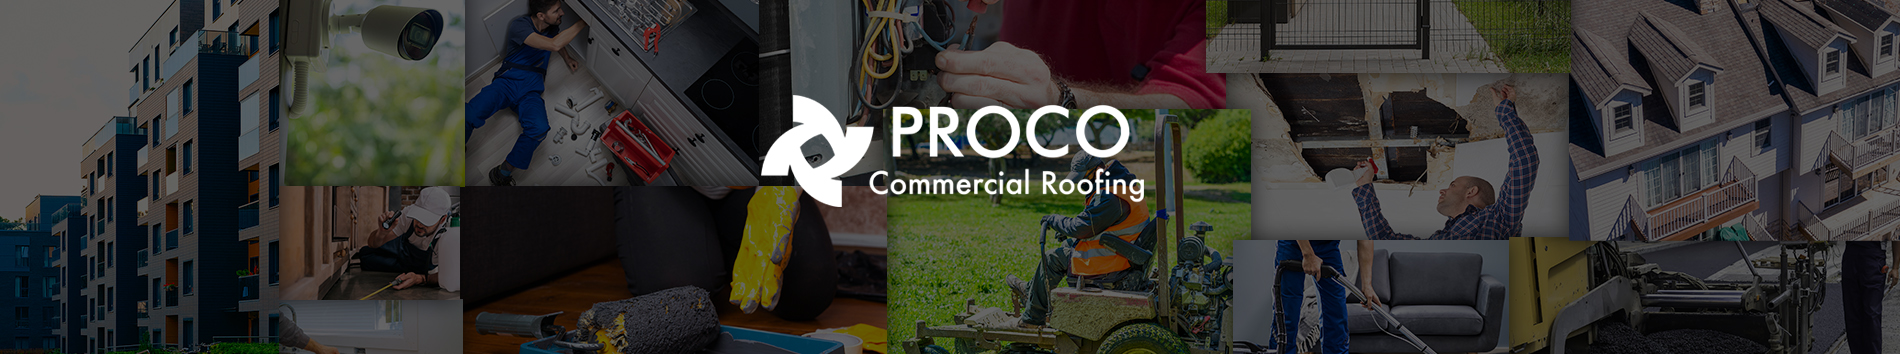 PROCO Commercial Roofing